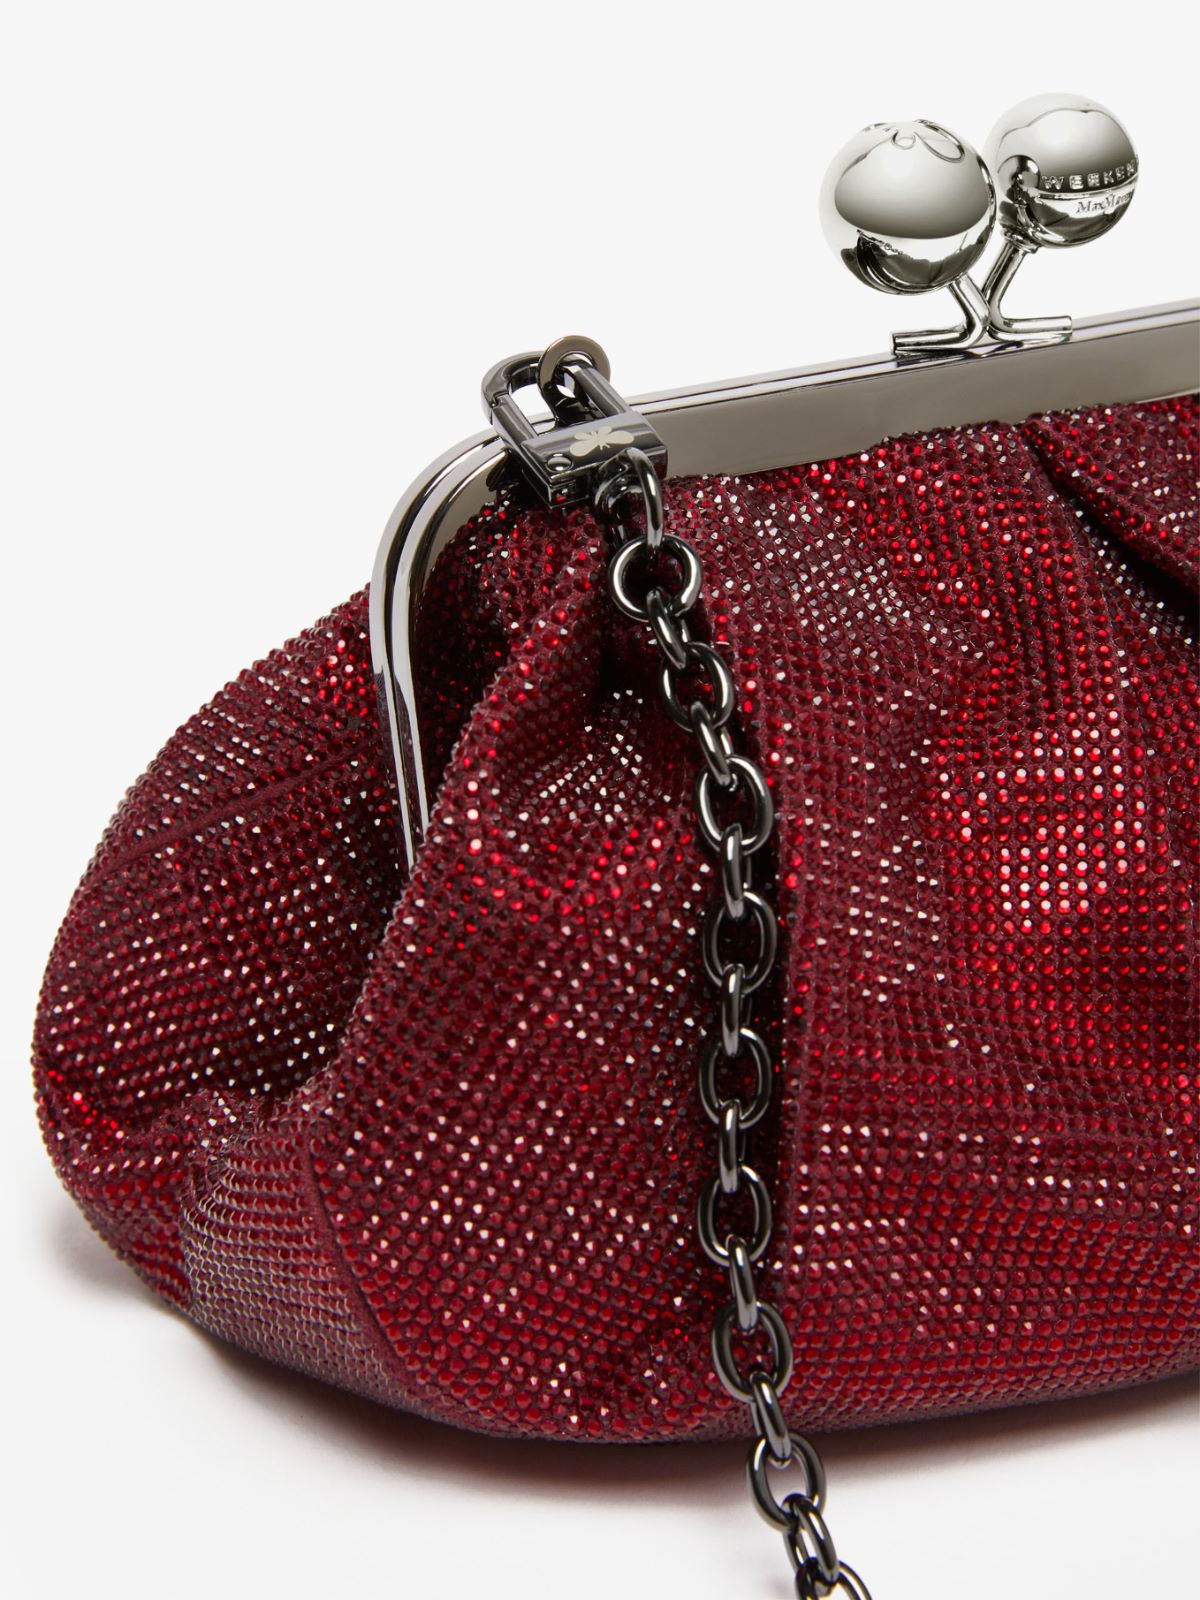 Pasticcino Bag Small in strass - ROSSO - Weekend Max Mara - 4